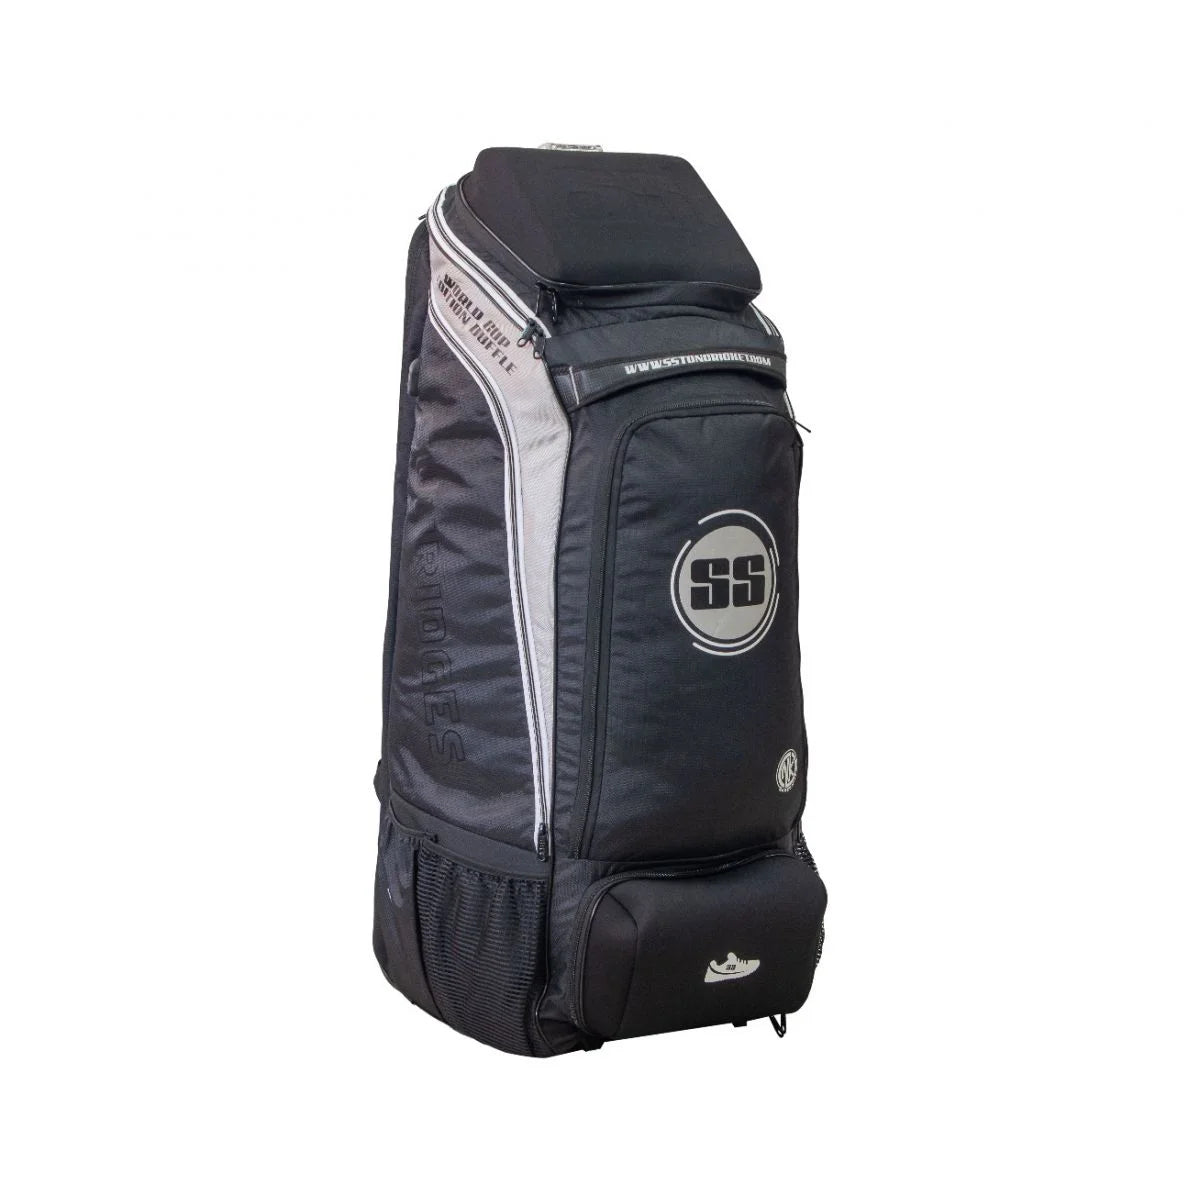 SS WORLD CUP EDITION DUFFLE CRICKET BAG - GRAY